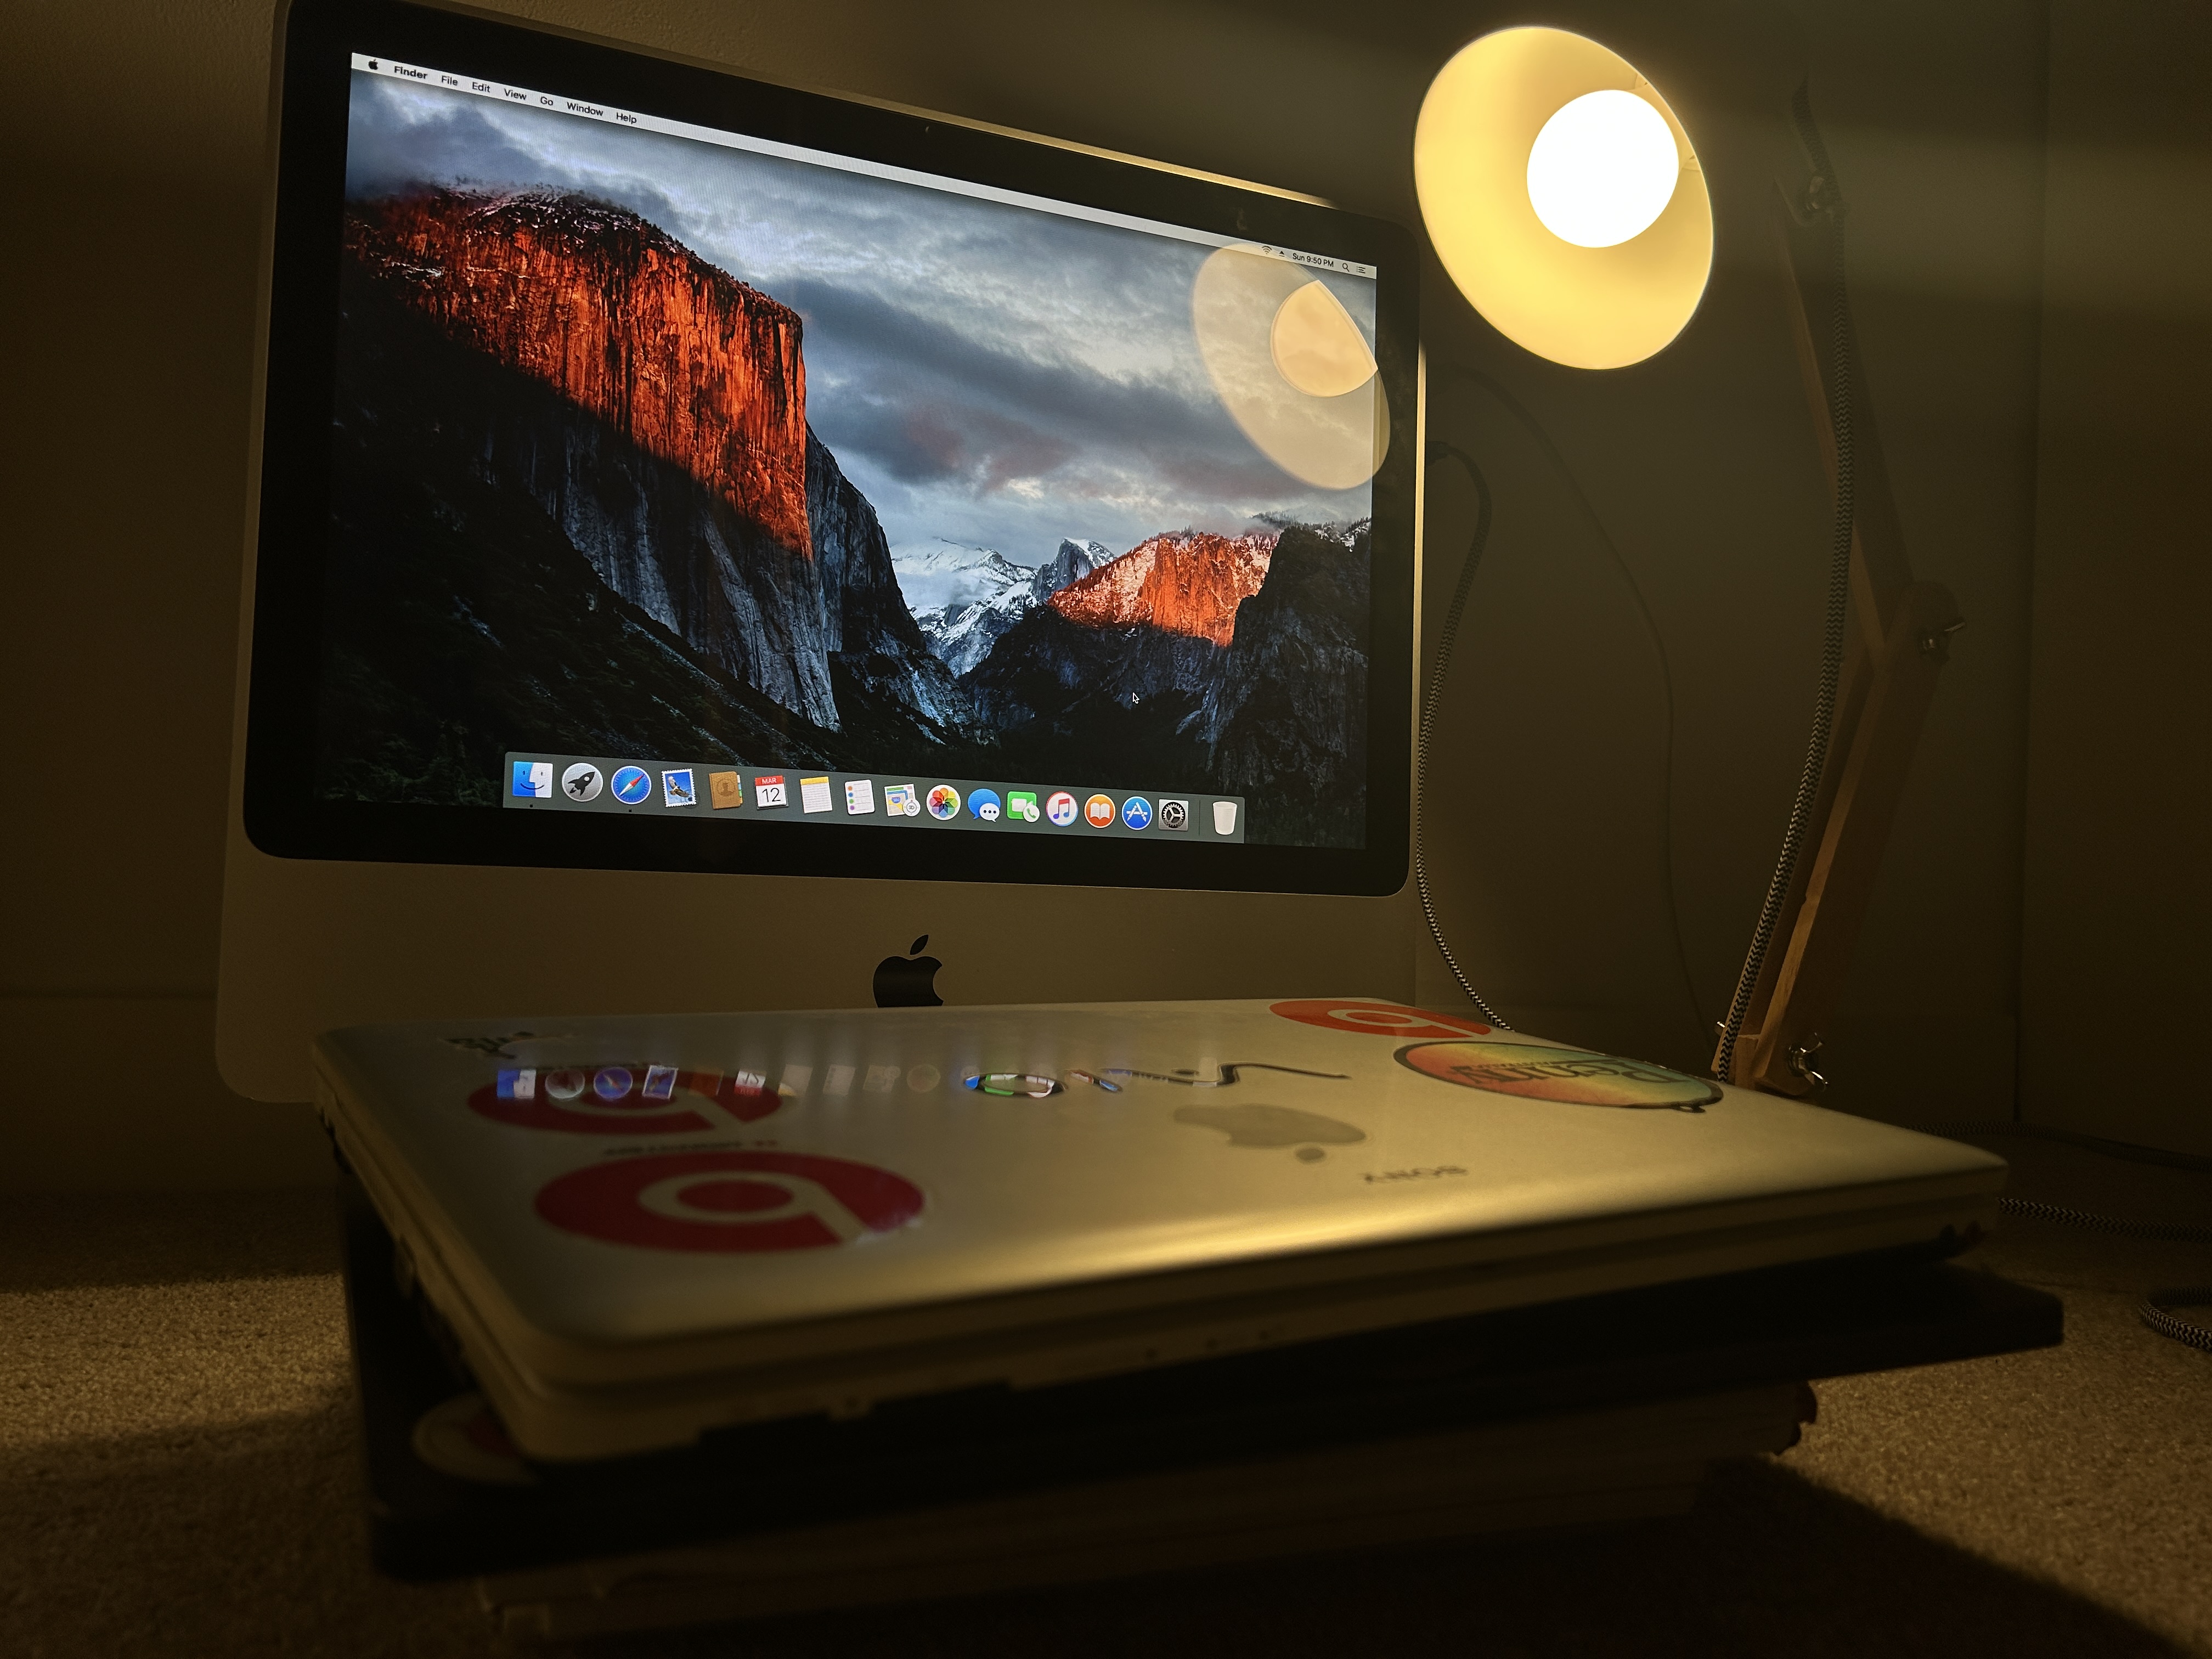 An old iMac and a pile of old laptops in a warm light